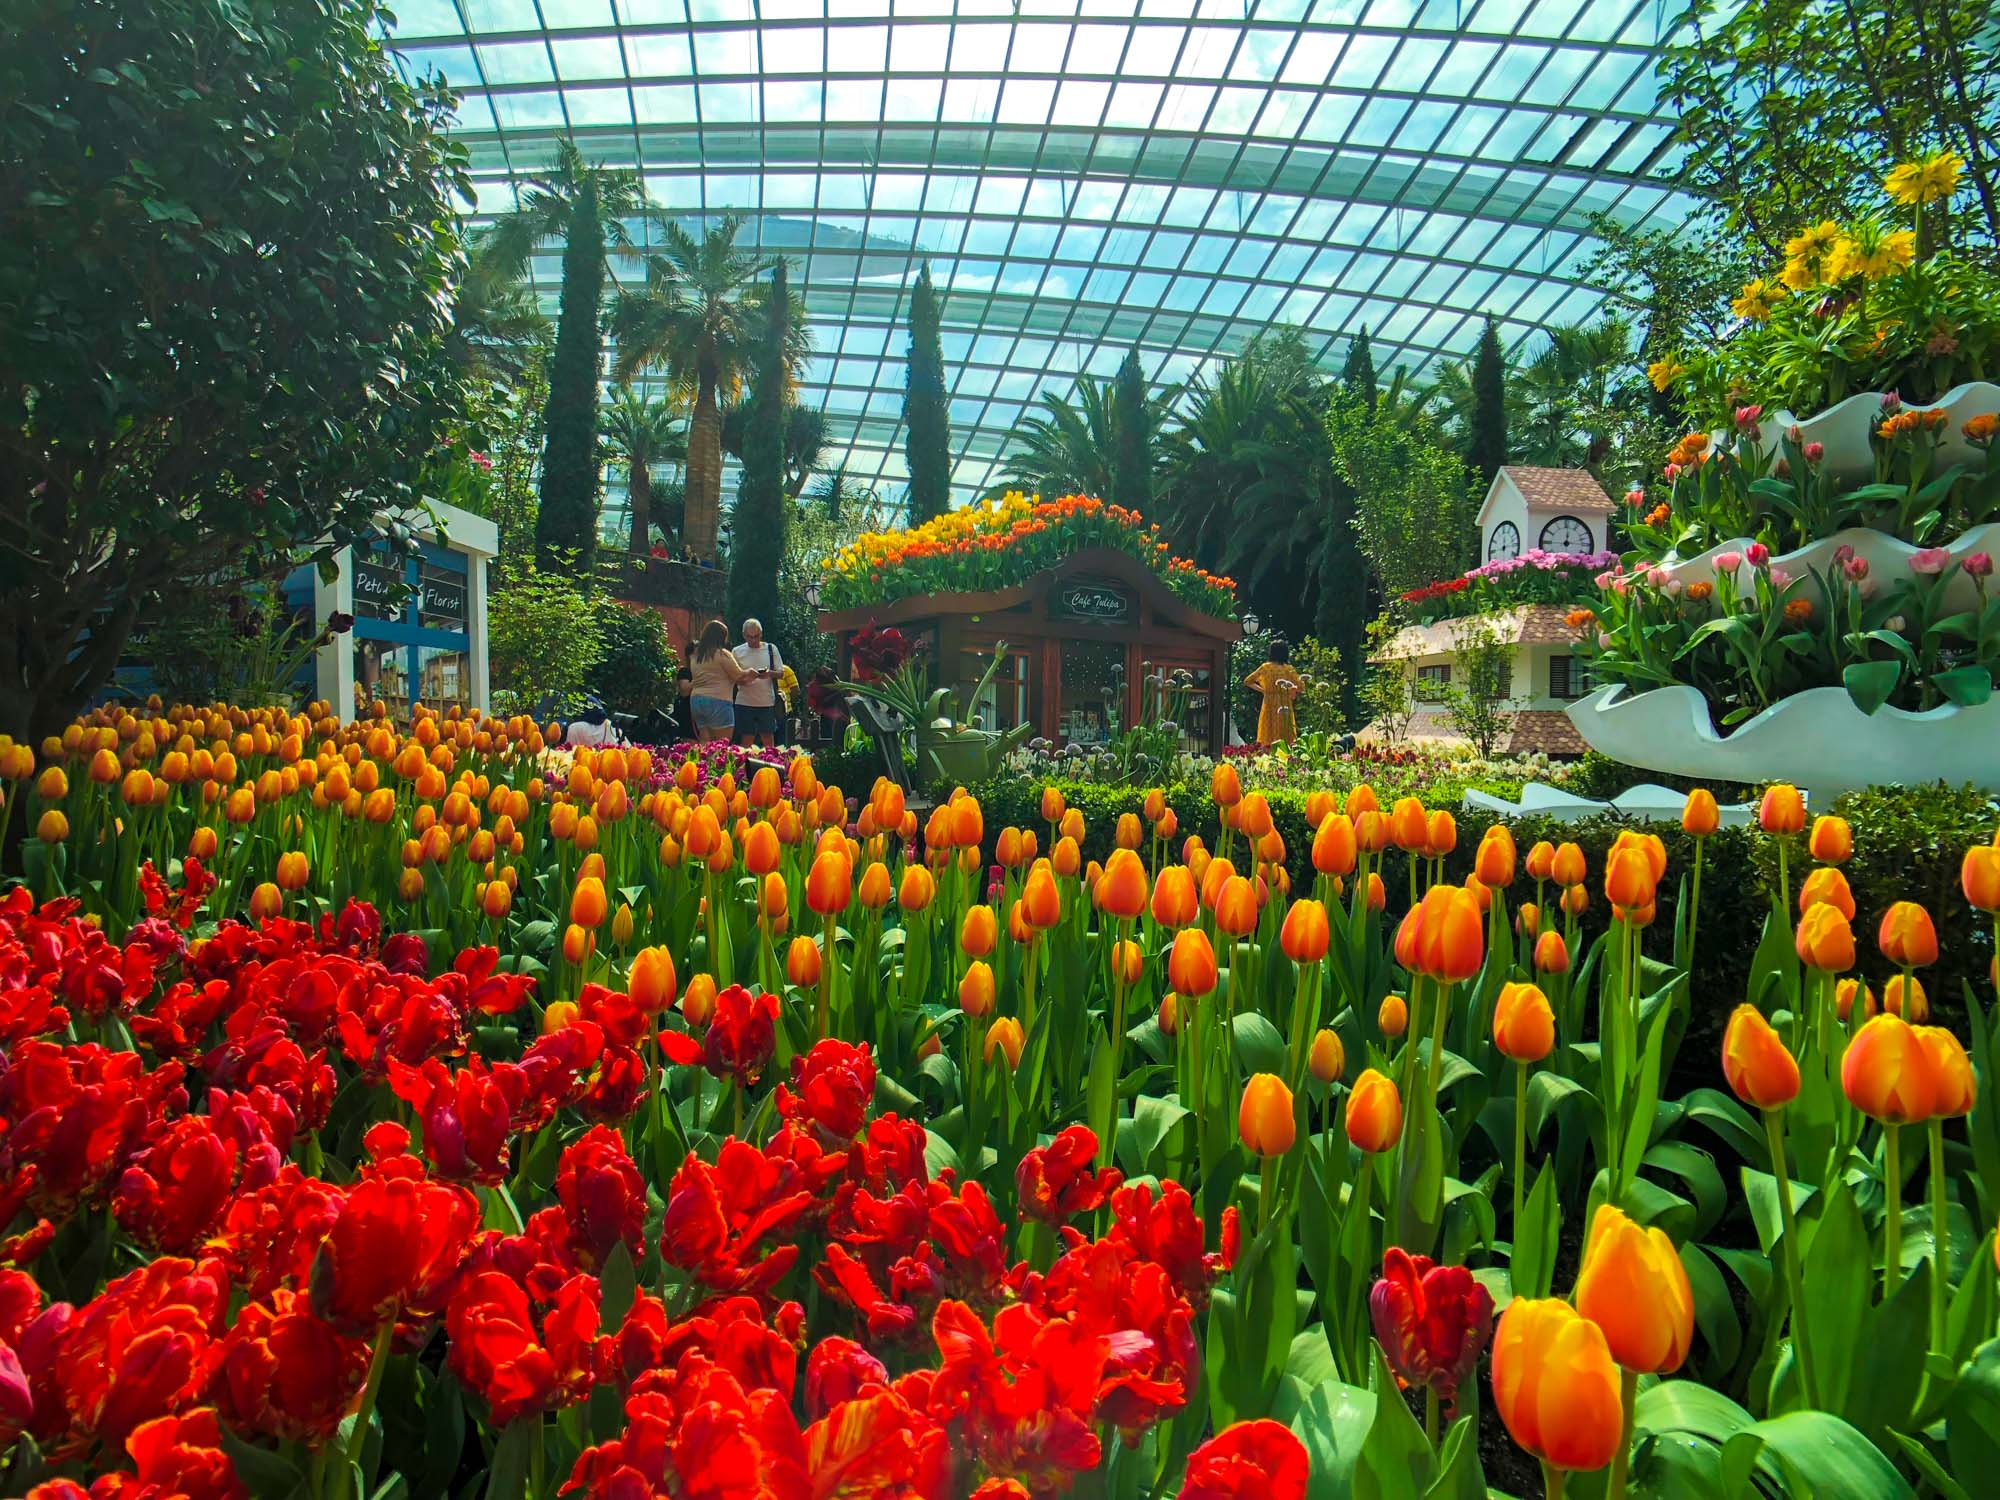 Tulipmania at Gardens by the Bay